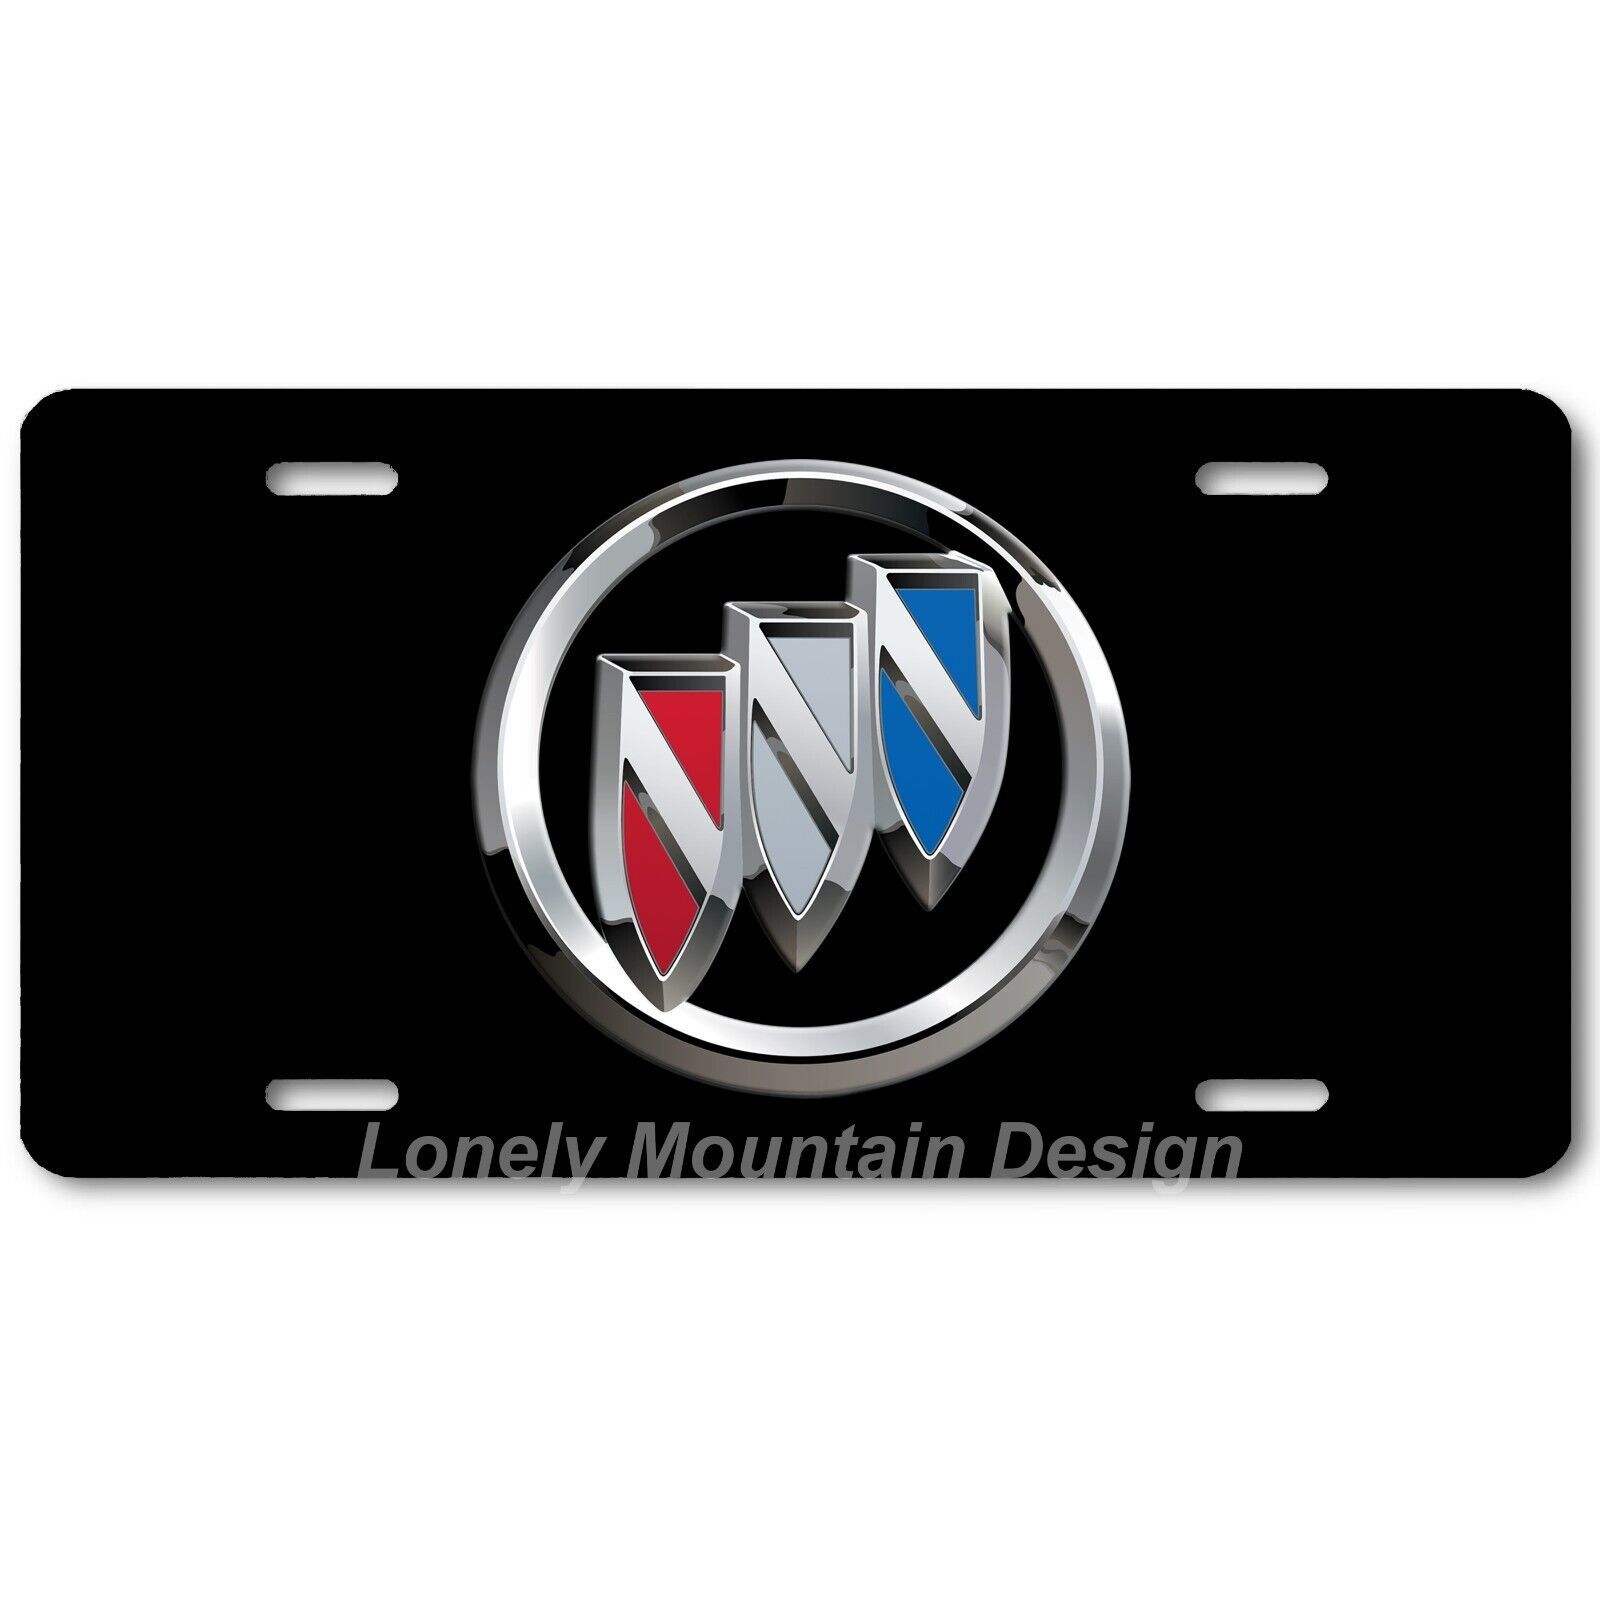 Primary image for Buick Inspired Art on Black FLAT Aluminum Novelty Auto Car License Tag Plate